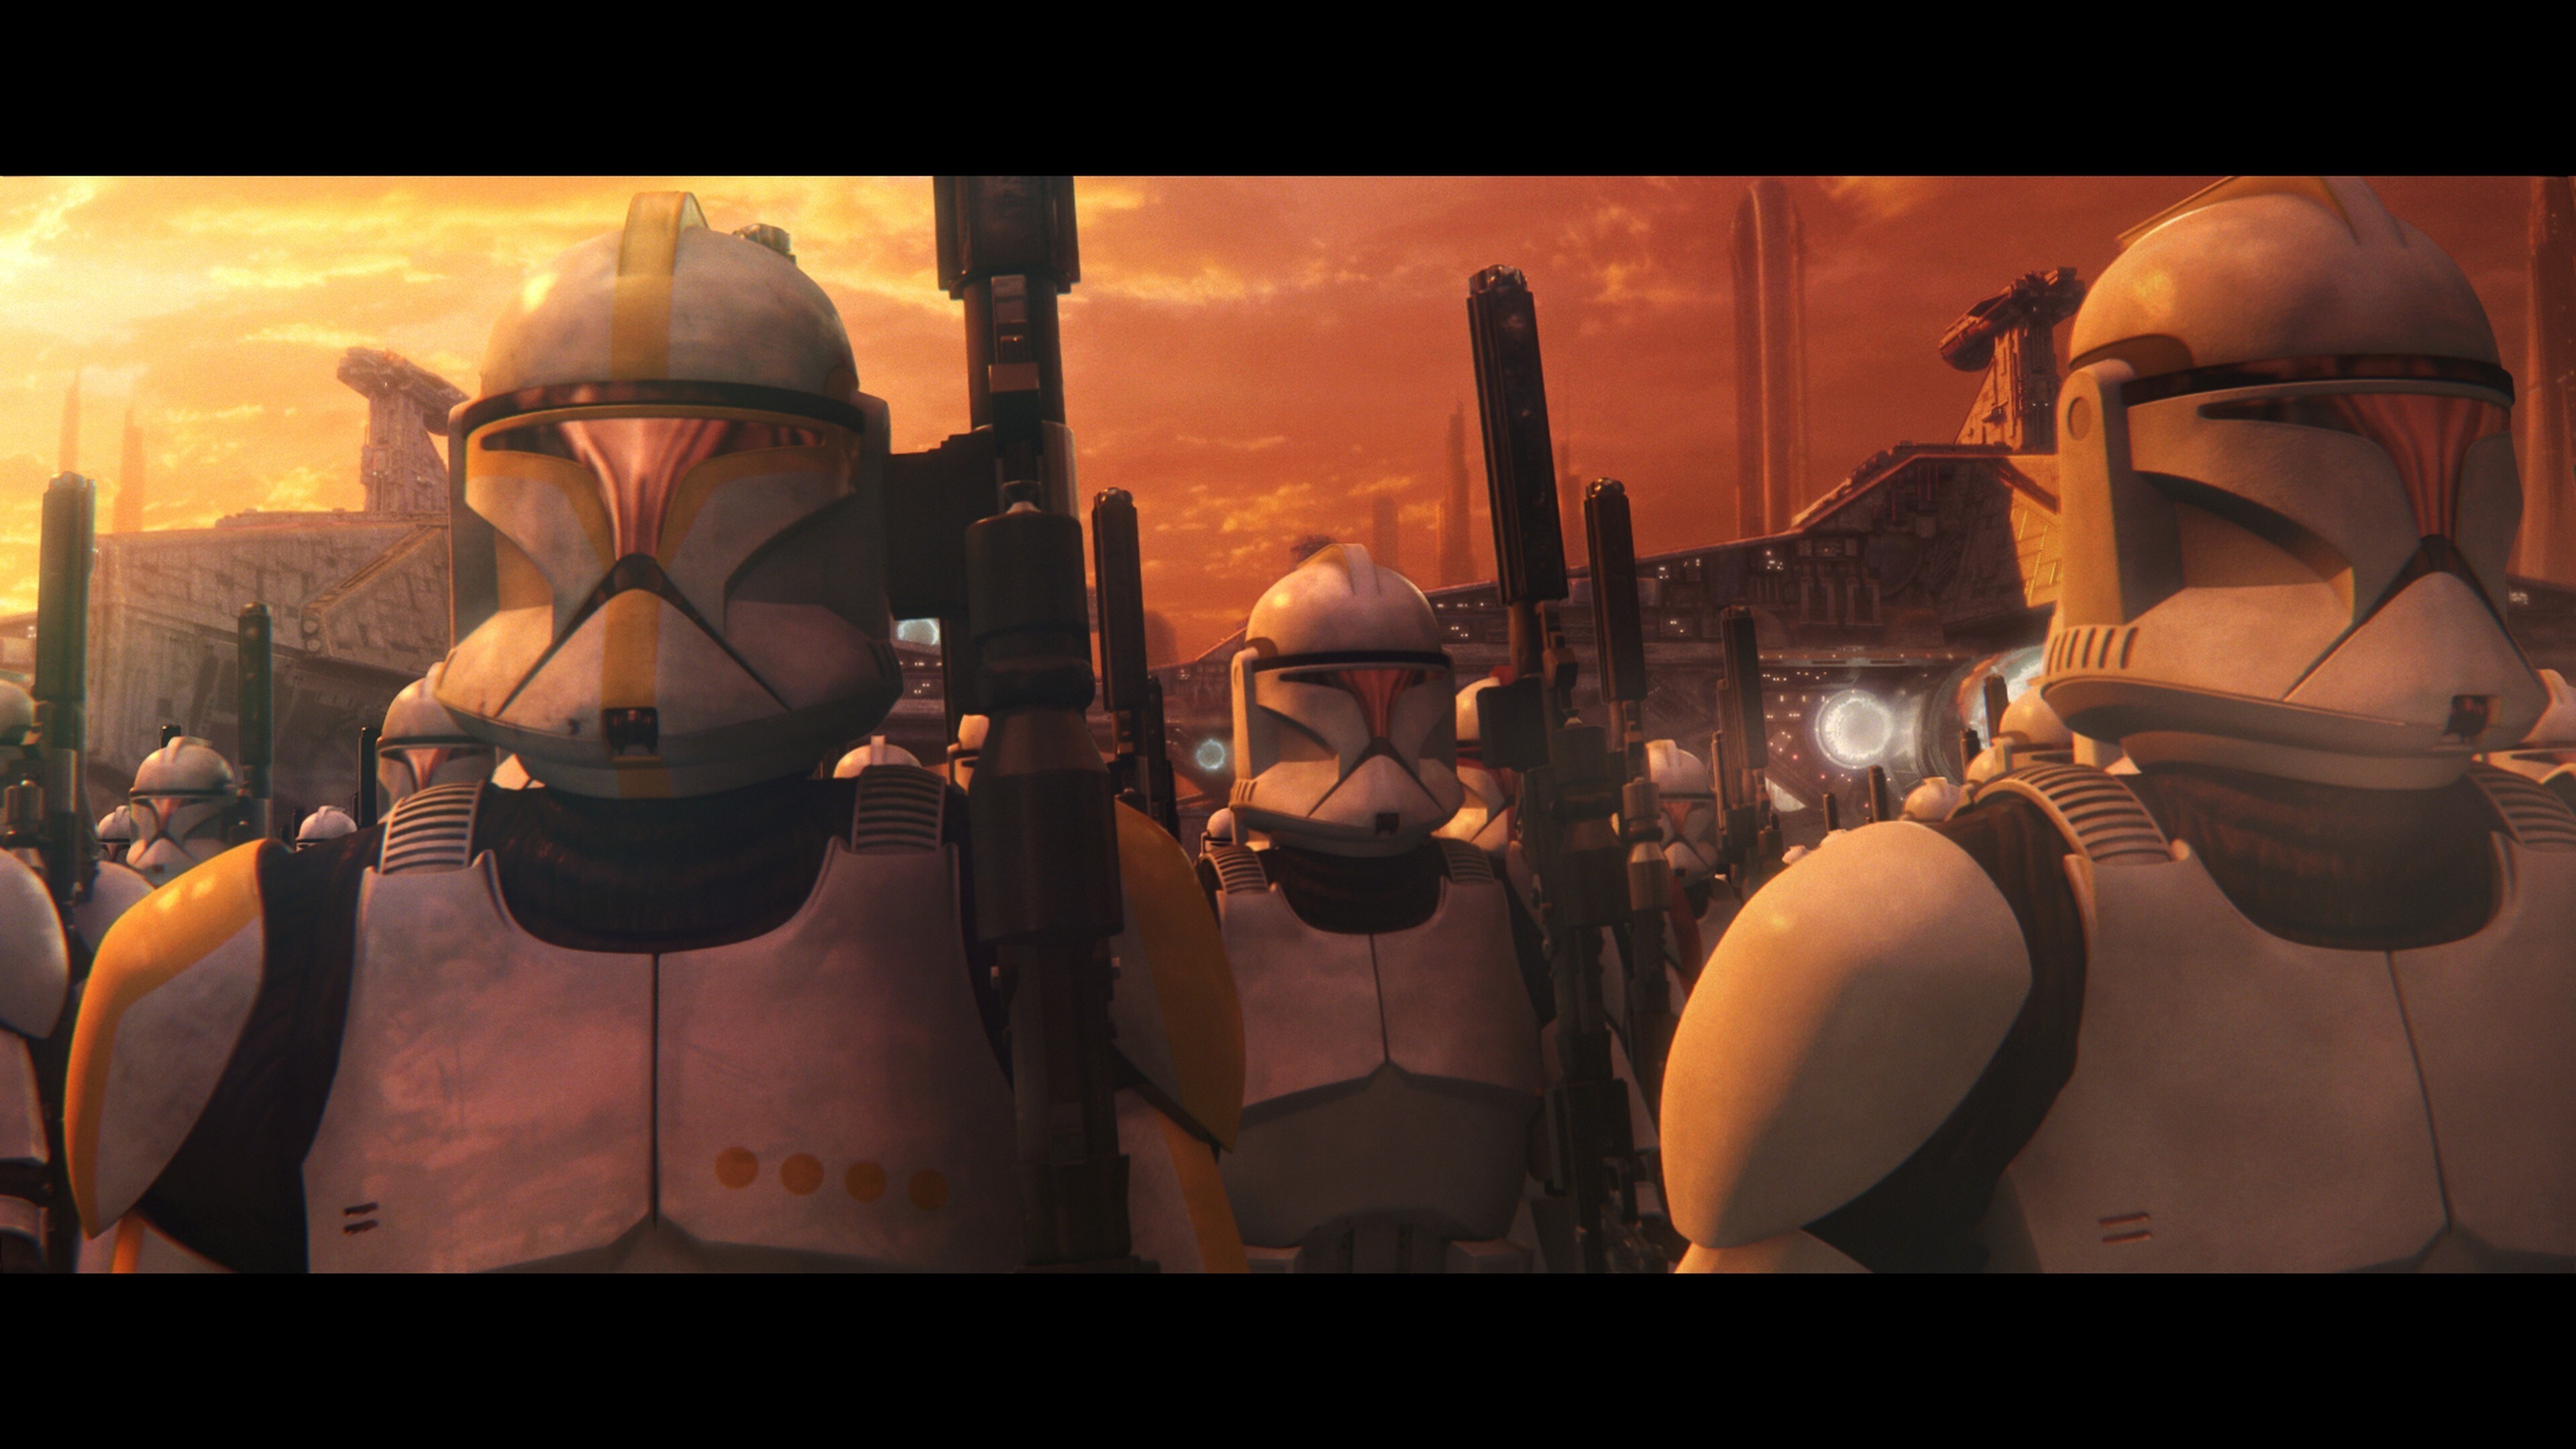 Meanwhile, Jango’s clones became the Grand Army of the Republic, waging war against the Separatis...